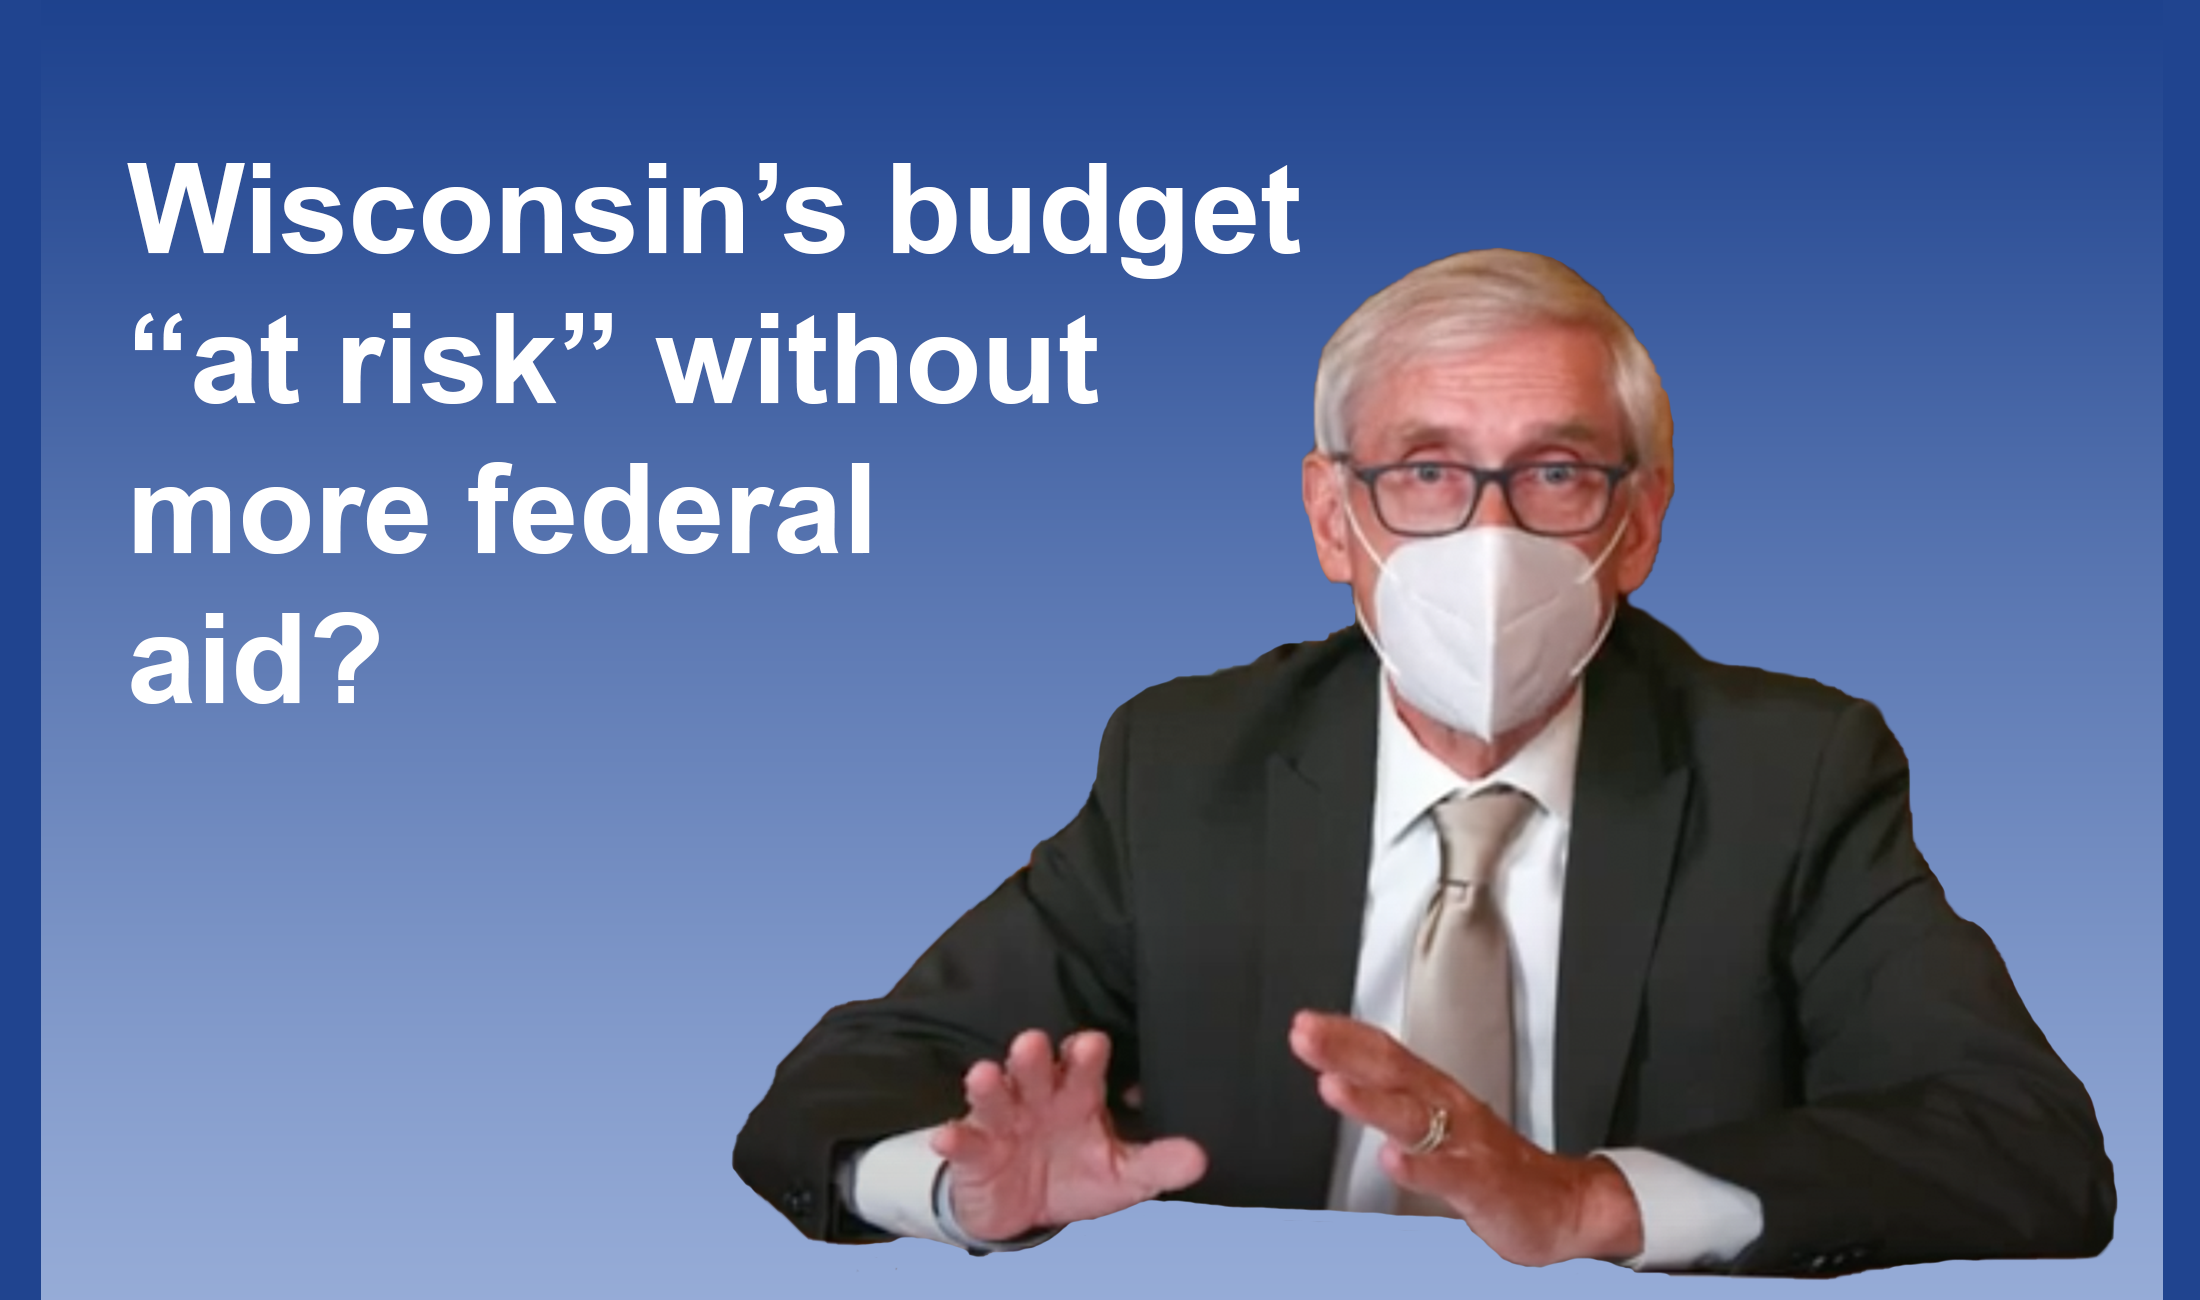 Gov. Evers Warns Of “Very, Very, Very Difficult” Budget Choices Without